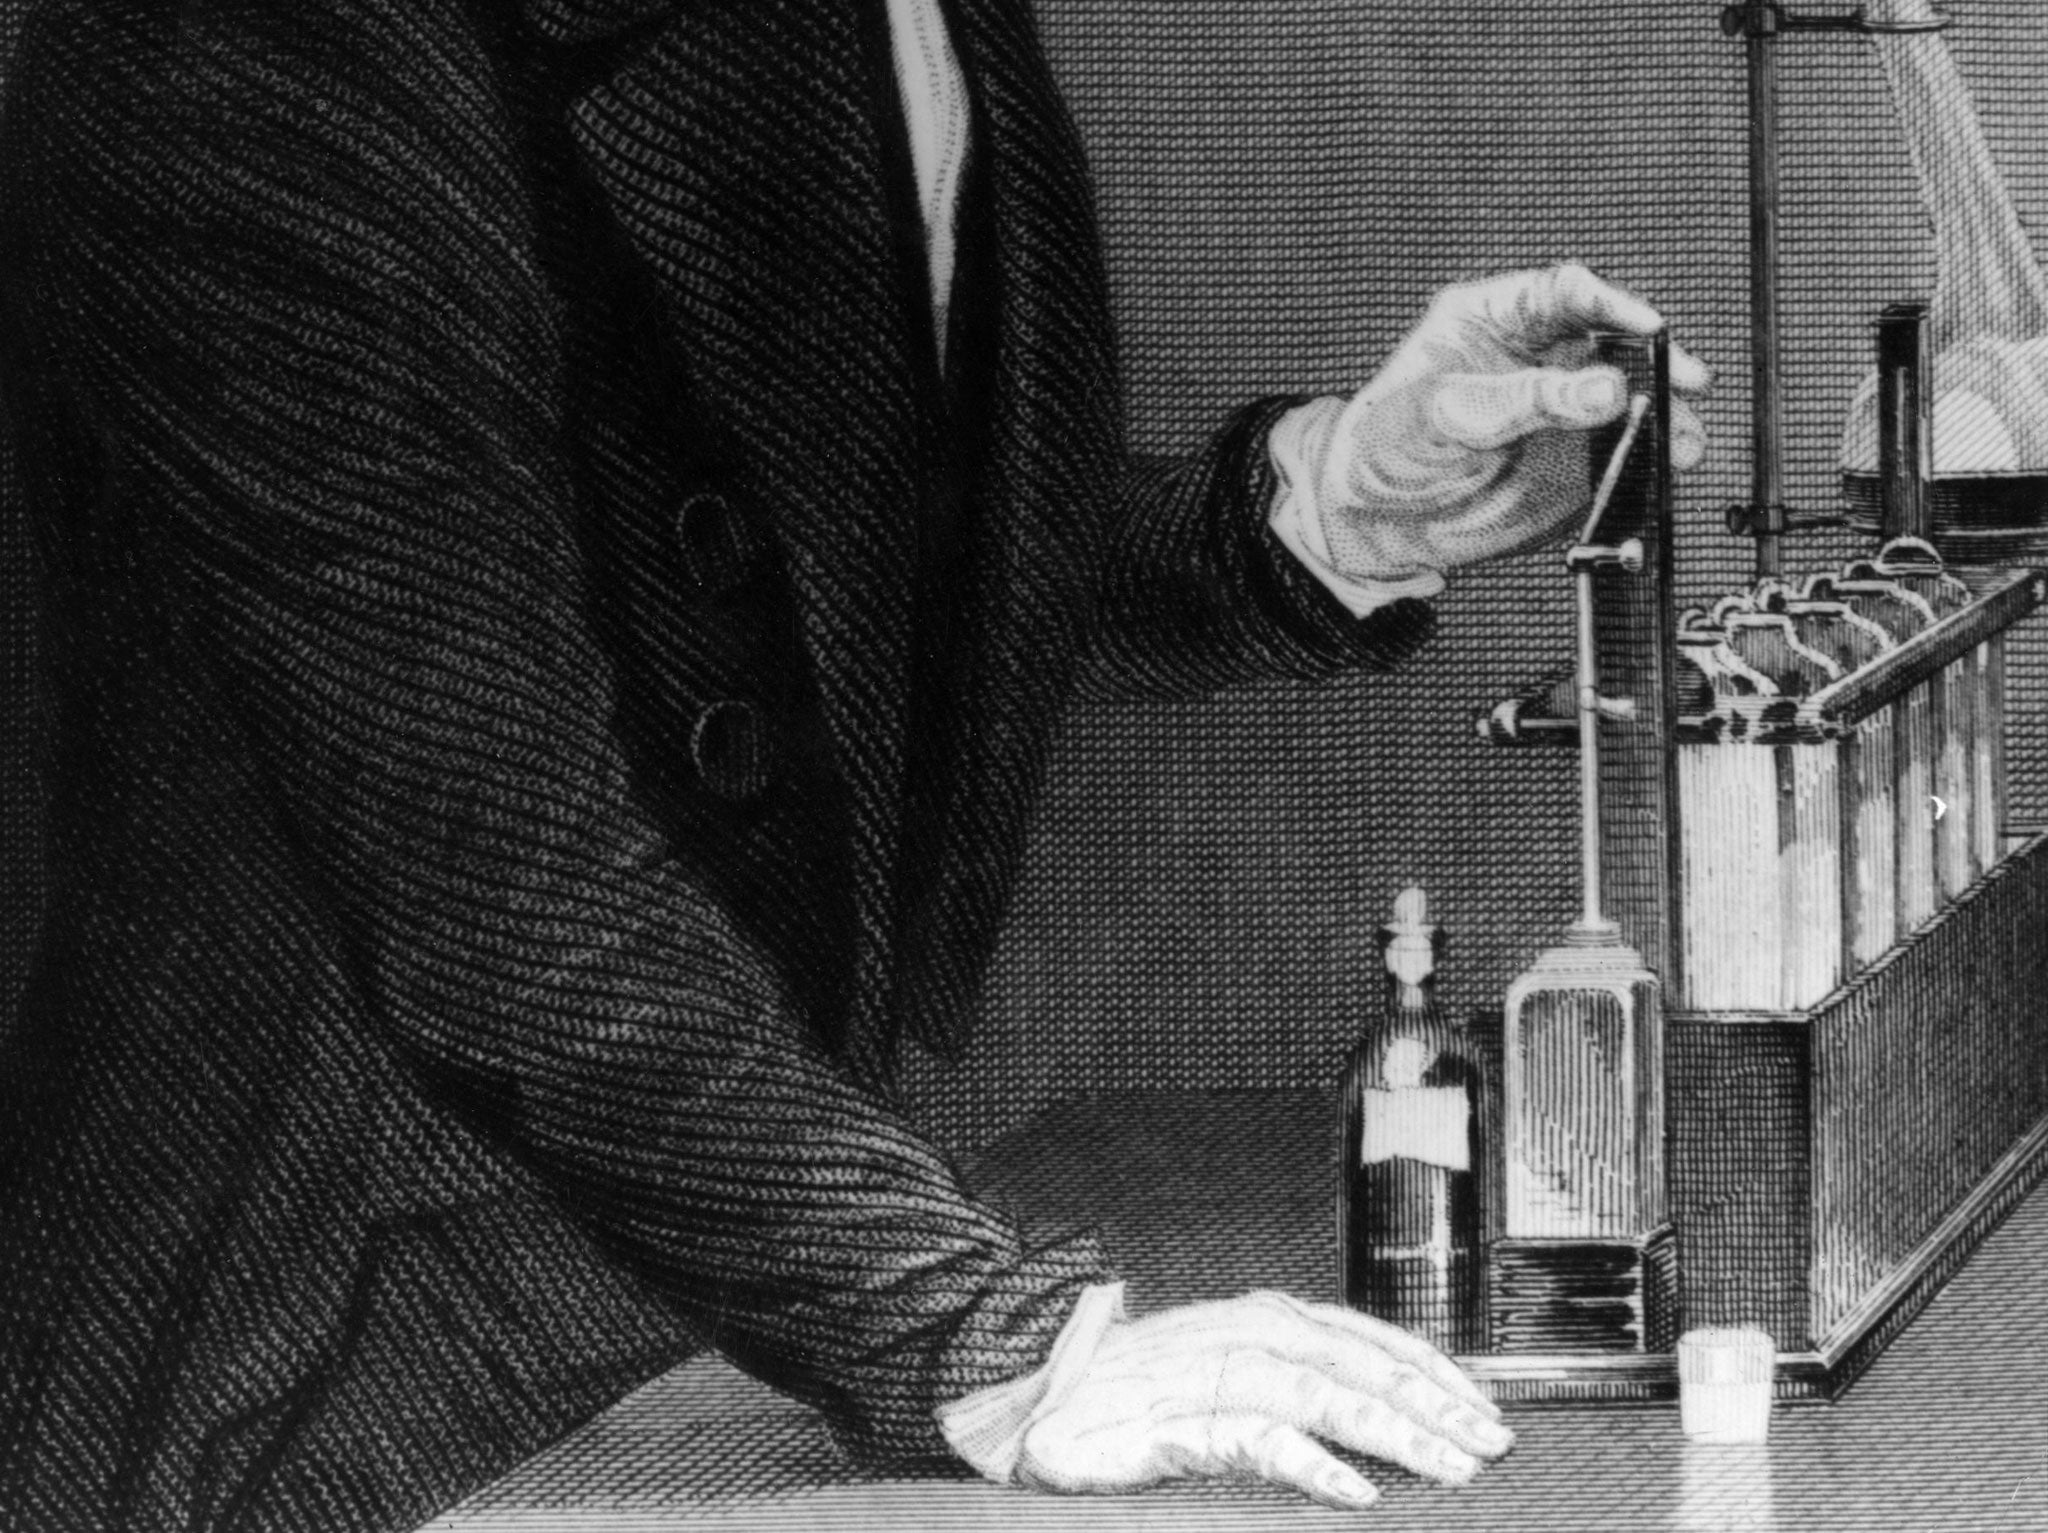 Detail from an illustration depicting Chemist and physicist Sir Michael Faraday (1791 - 1867), creator of the classical field theory.